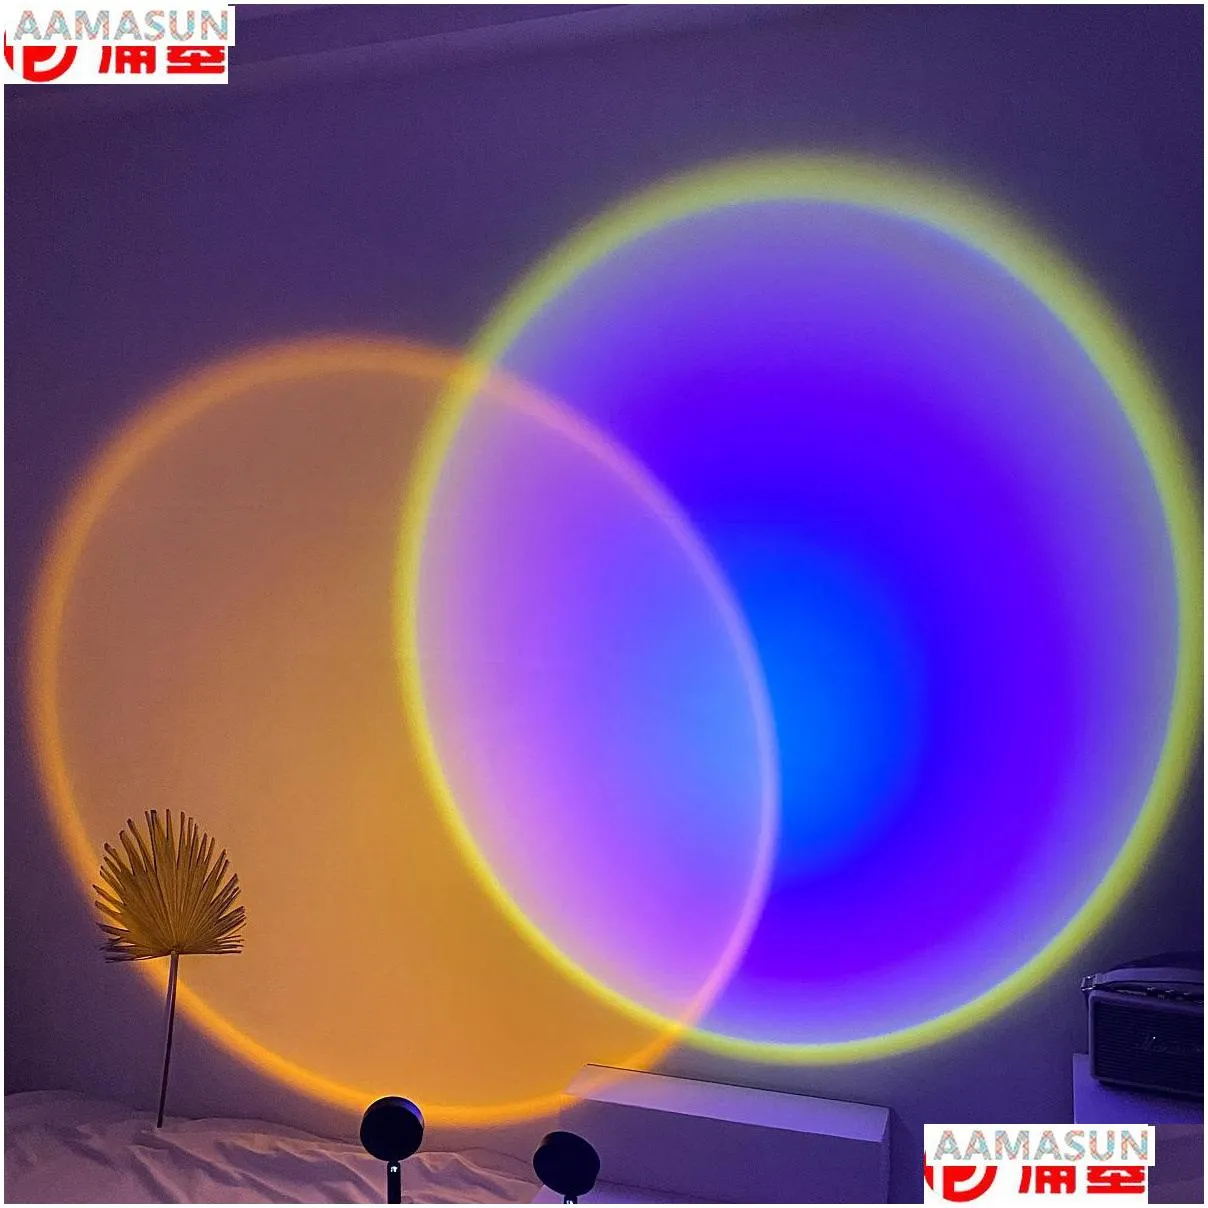 rainbow sunset projector night sunset lamp projector atmosphere led night light home coffe shop background wall decoration colorful